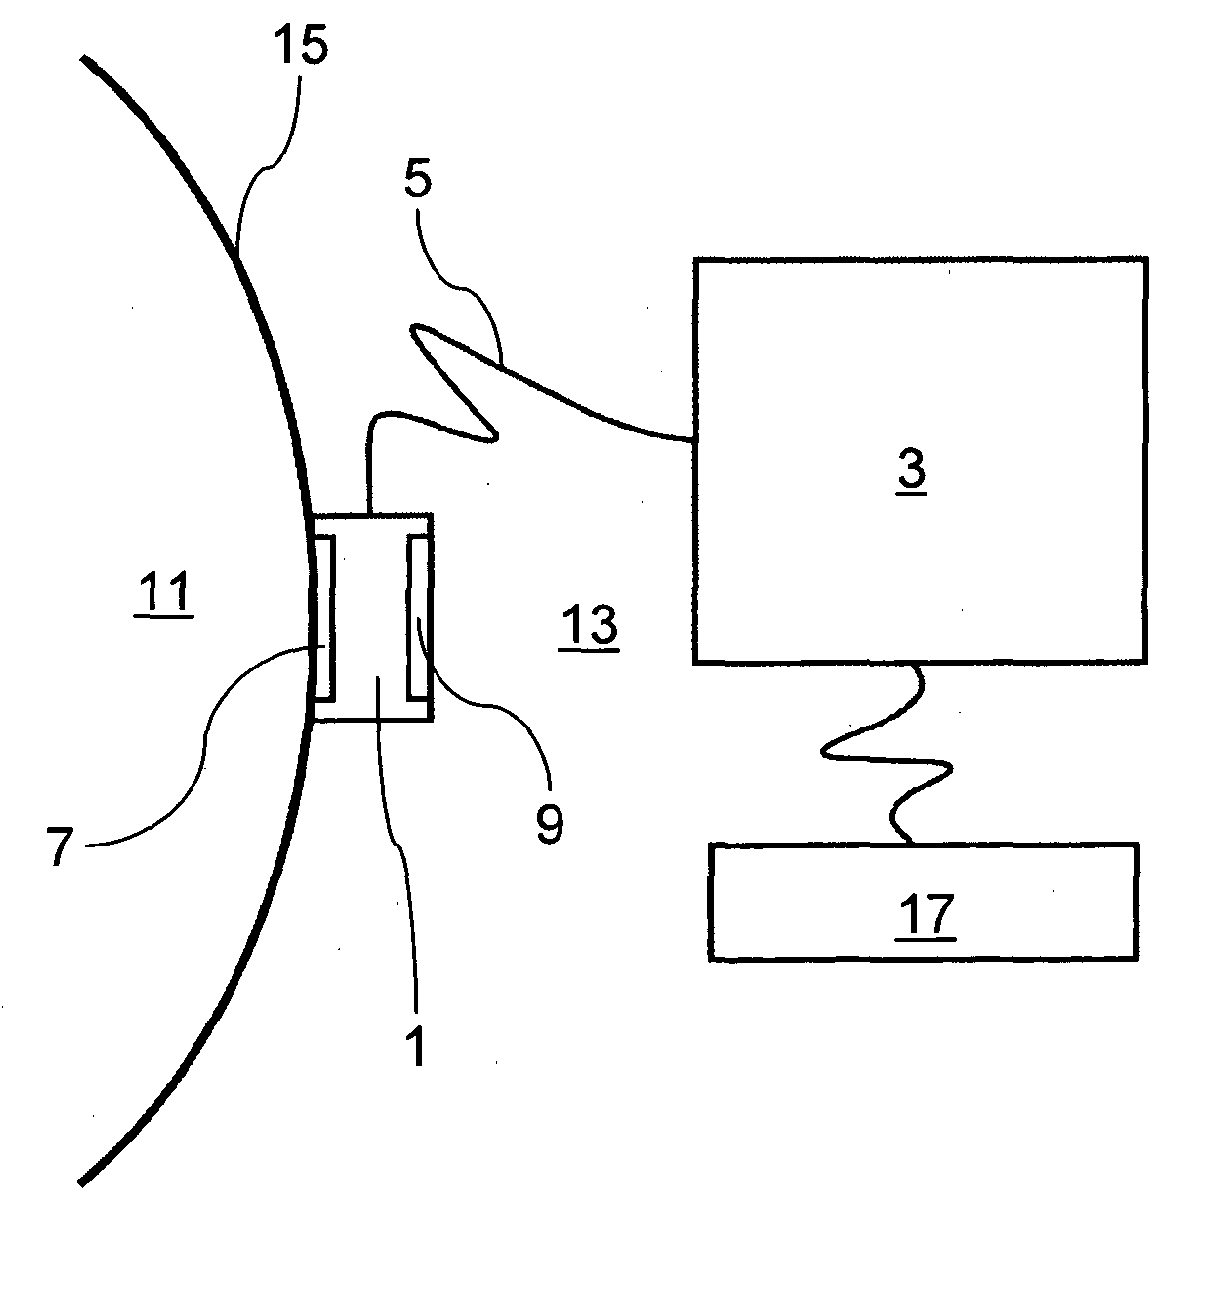 Method and device for determining a core body temperature